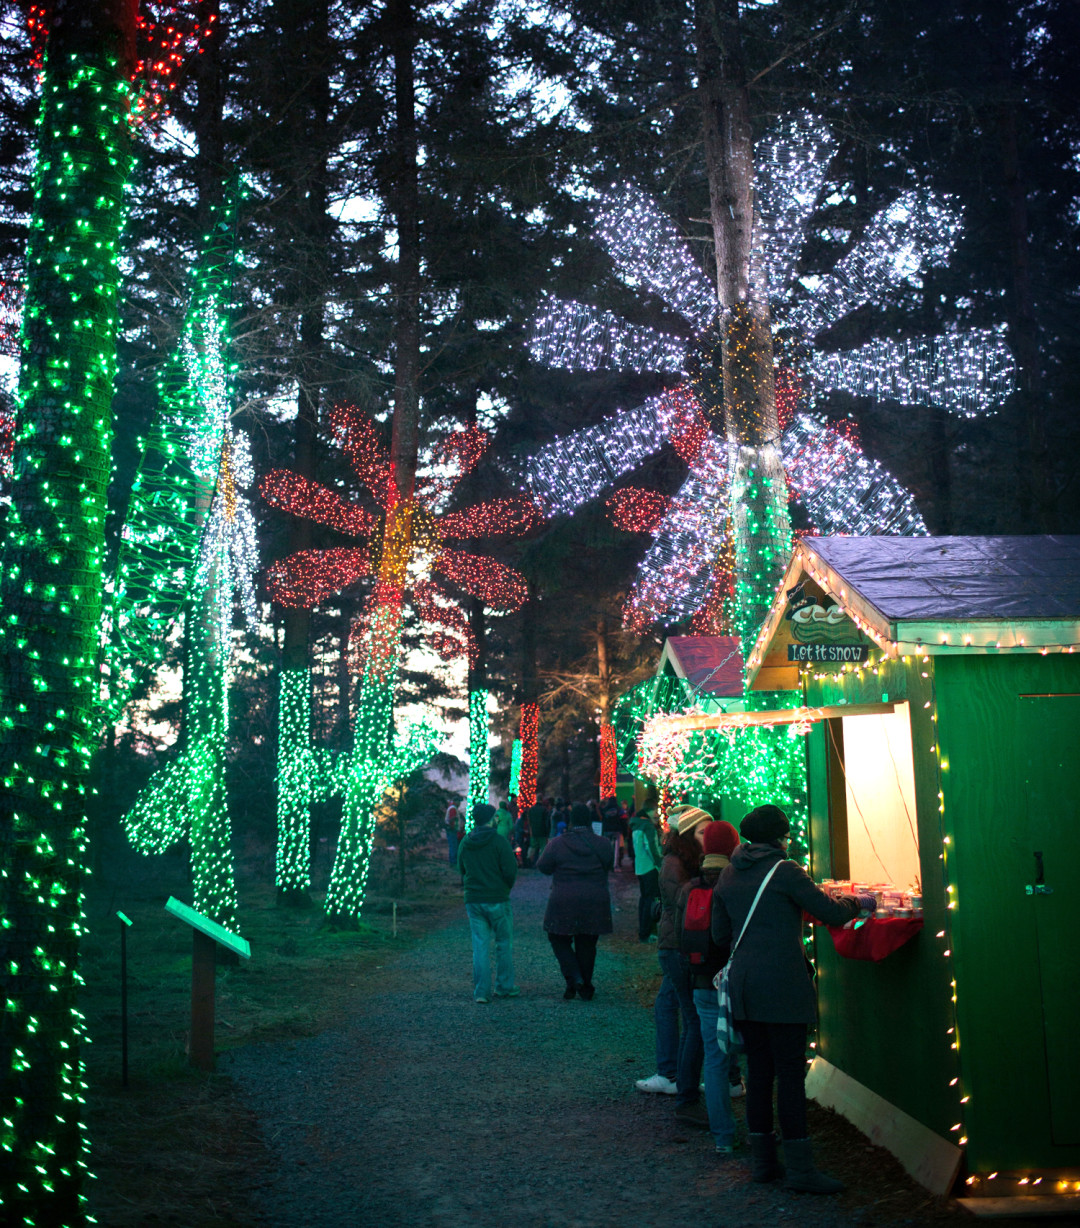 Here Are the Best 13 Places in Oregon to See Christmas Lights That